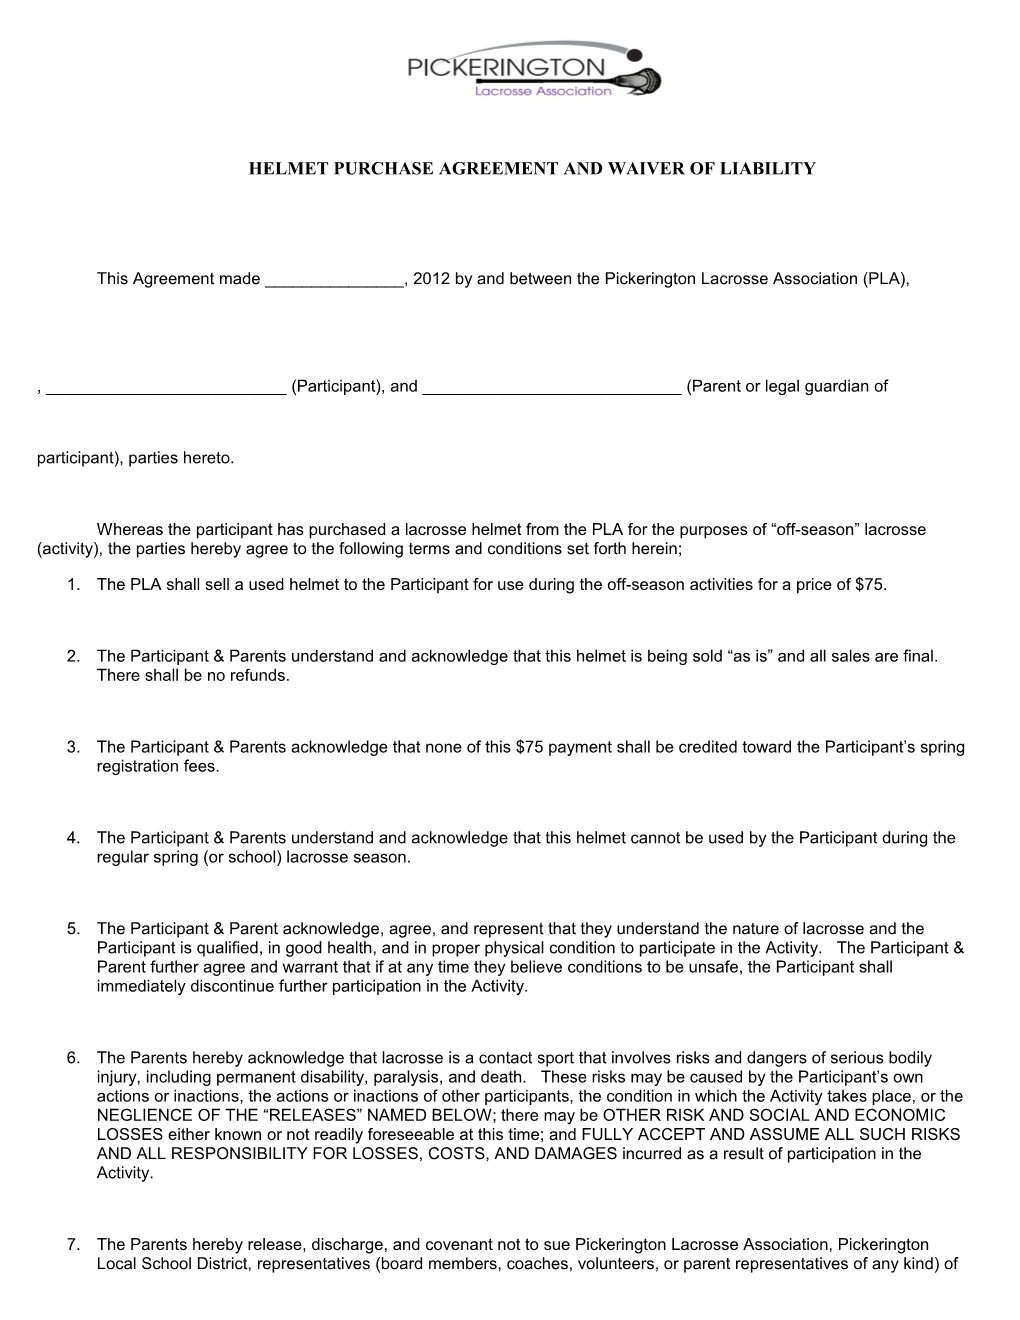 Equipment Usage Agreement and Waiver of Liability